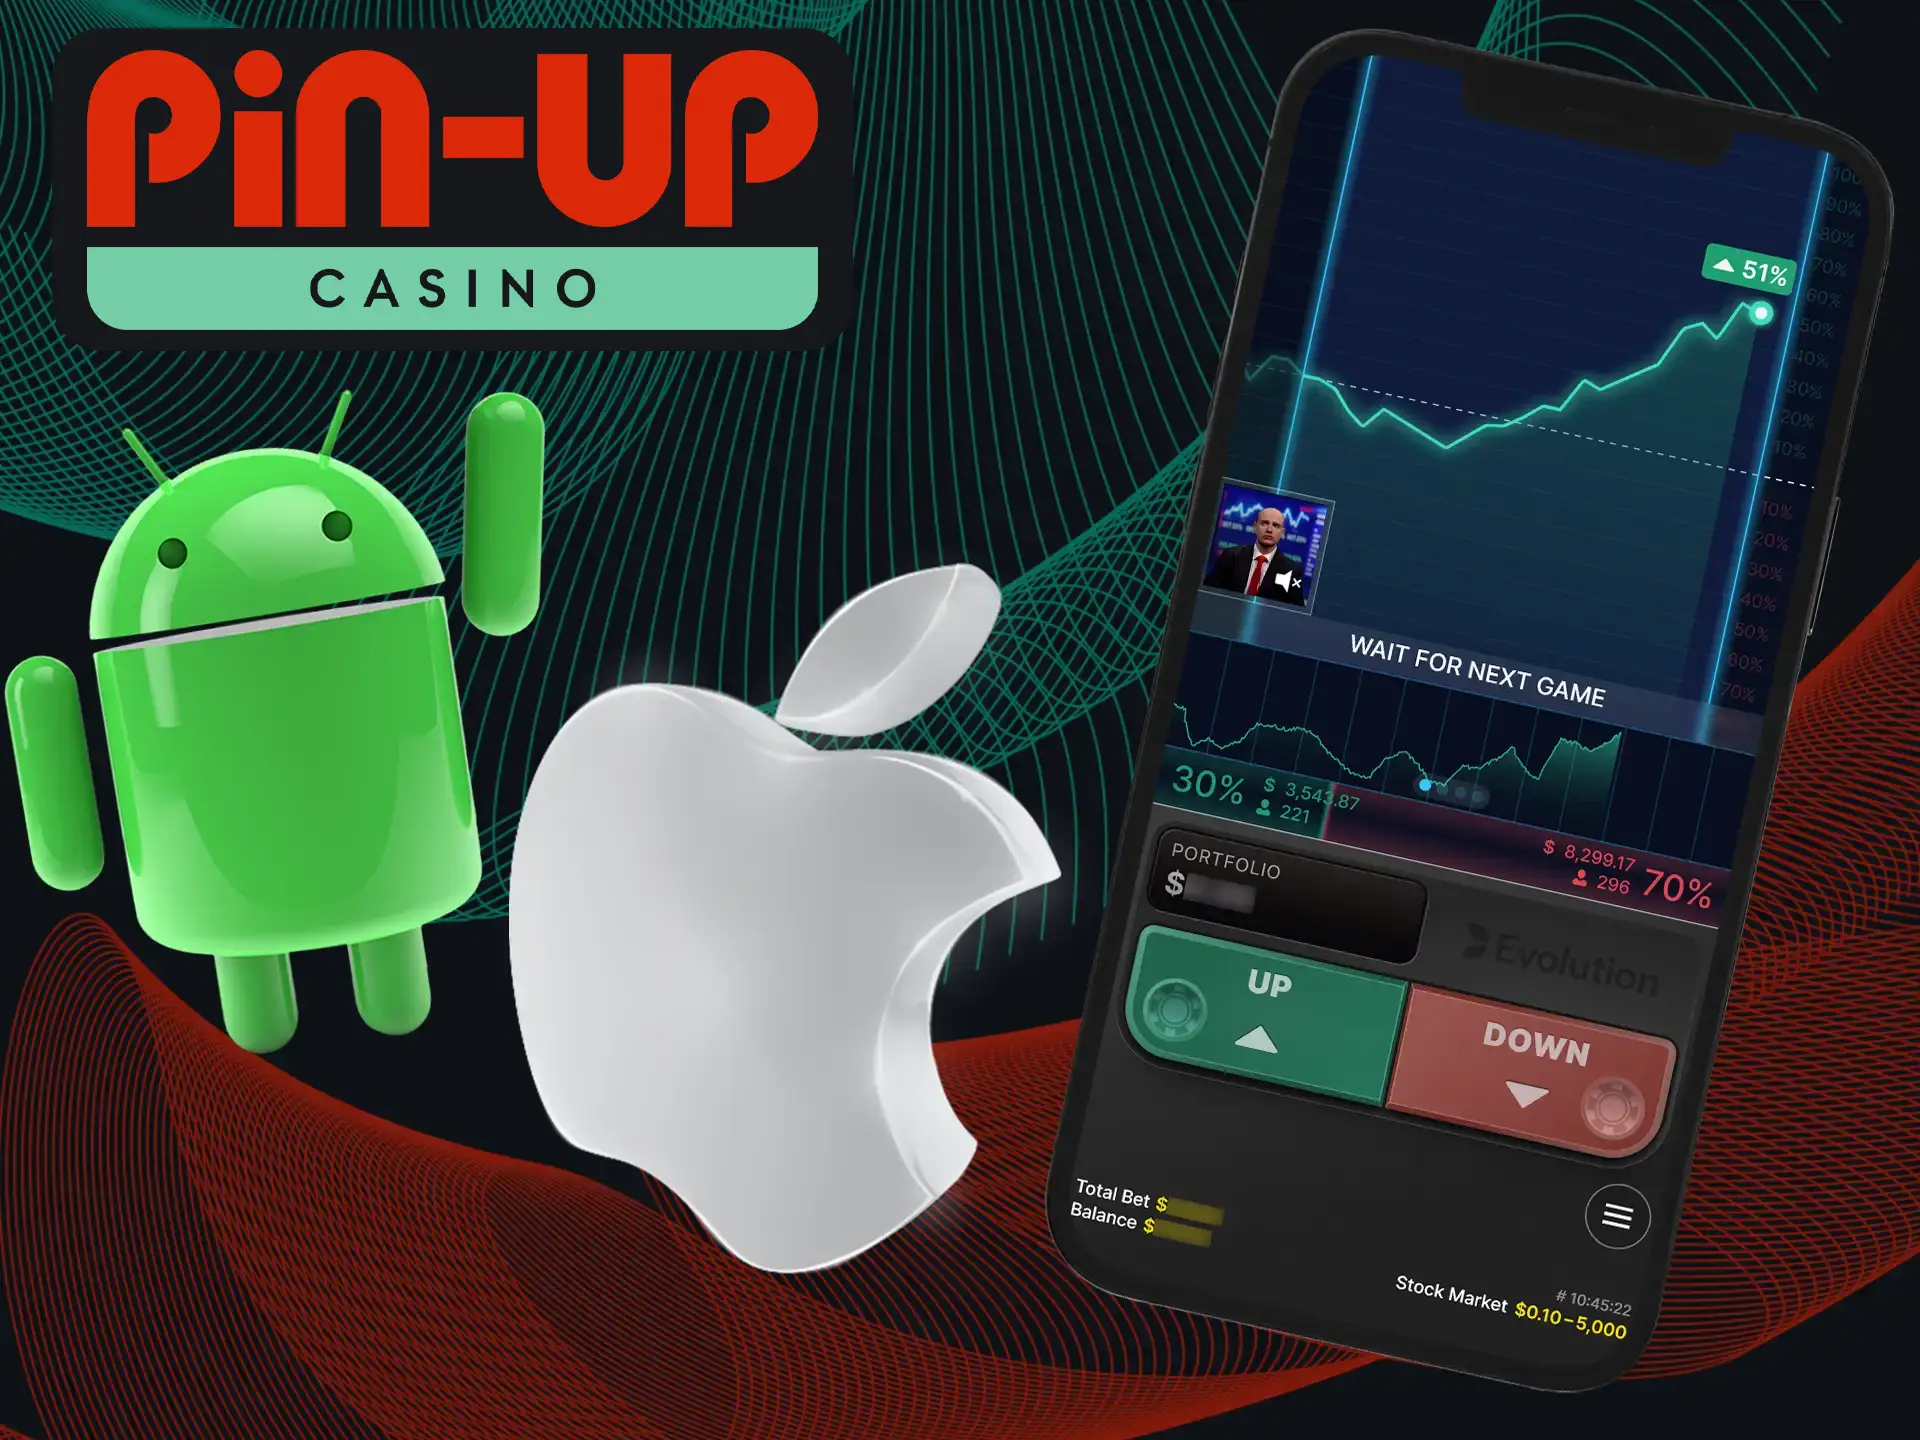 With the Pin-Up app, you can get an exciting Stock Market game experience right on your phone.